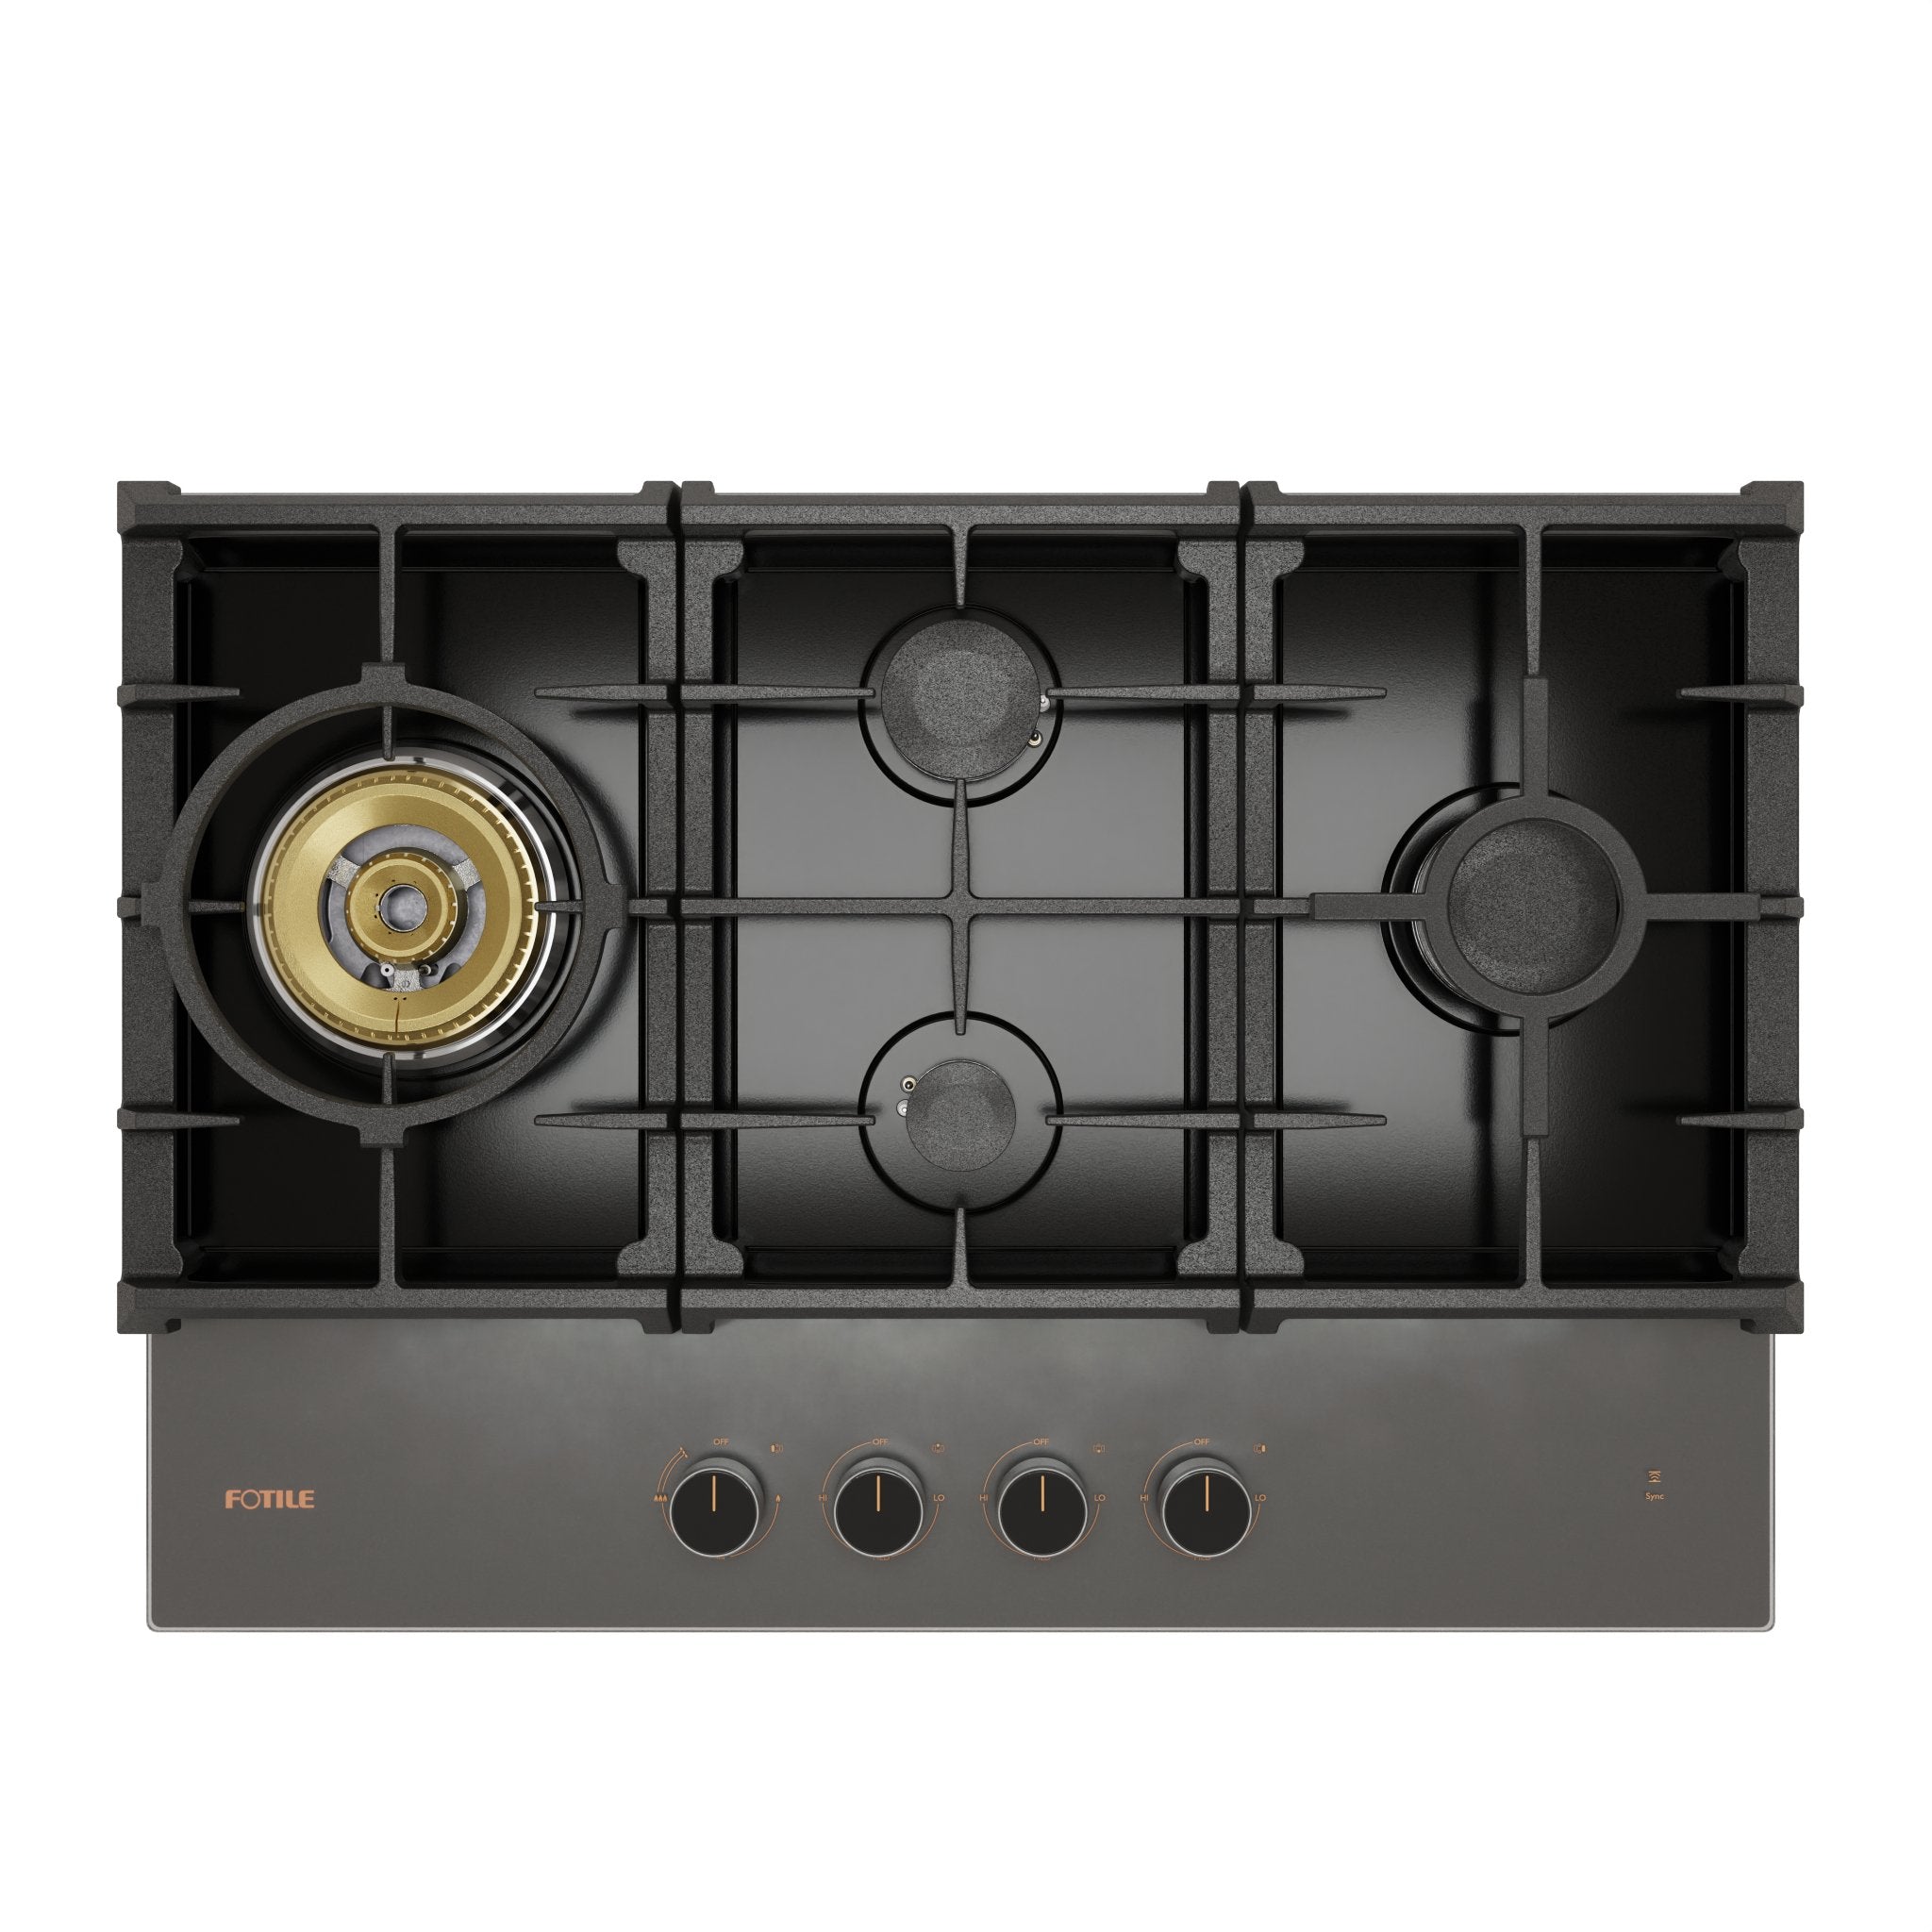 FOTILE EPS Cooktop with Total 35K BTU on 3 Sealed Burners, Fast Ignition  and Flame Failure Detection Device - Bed Bath & Beyond - 31437022